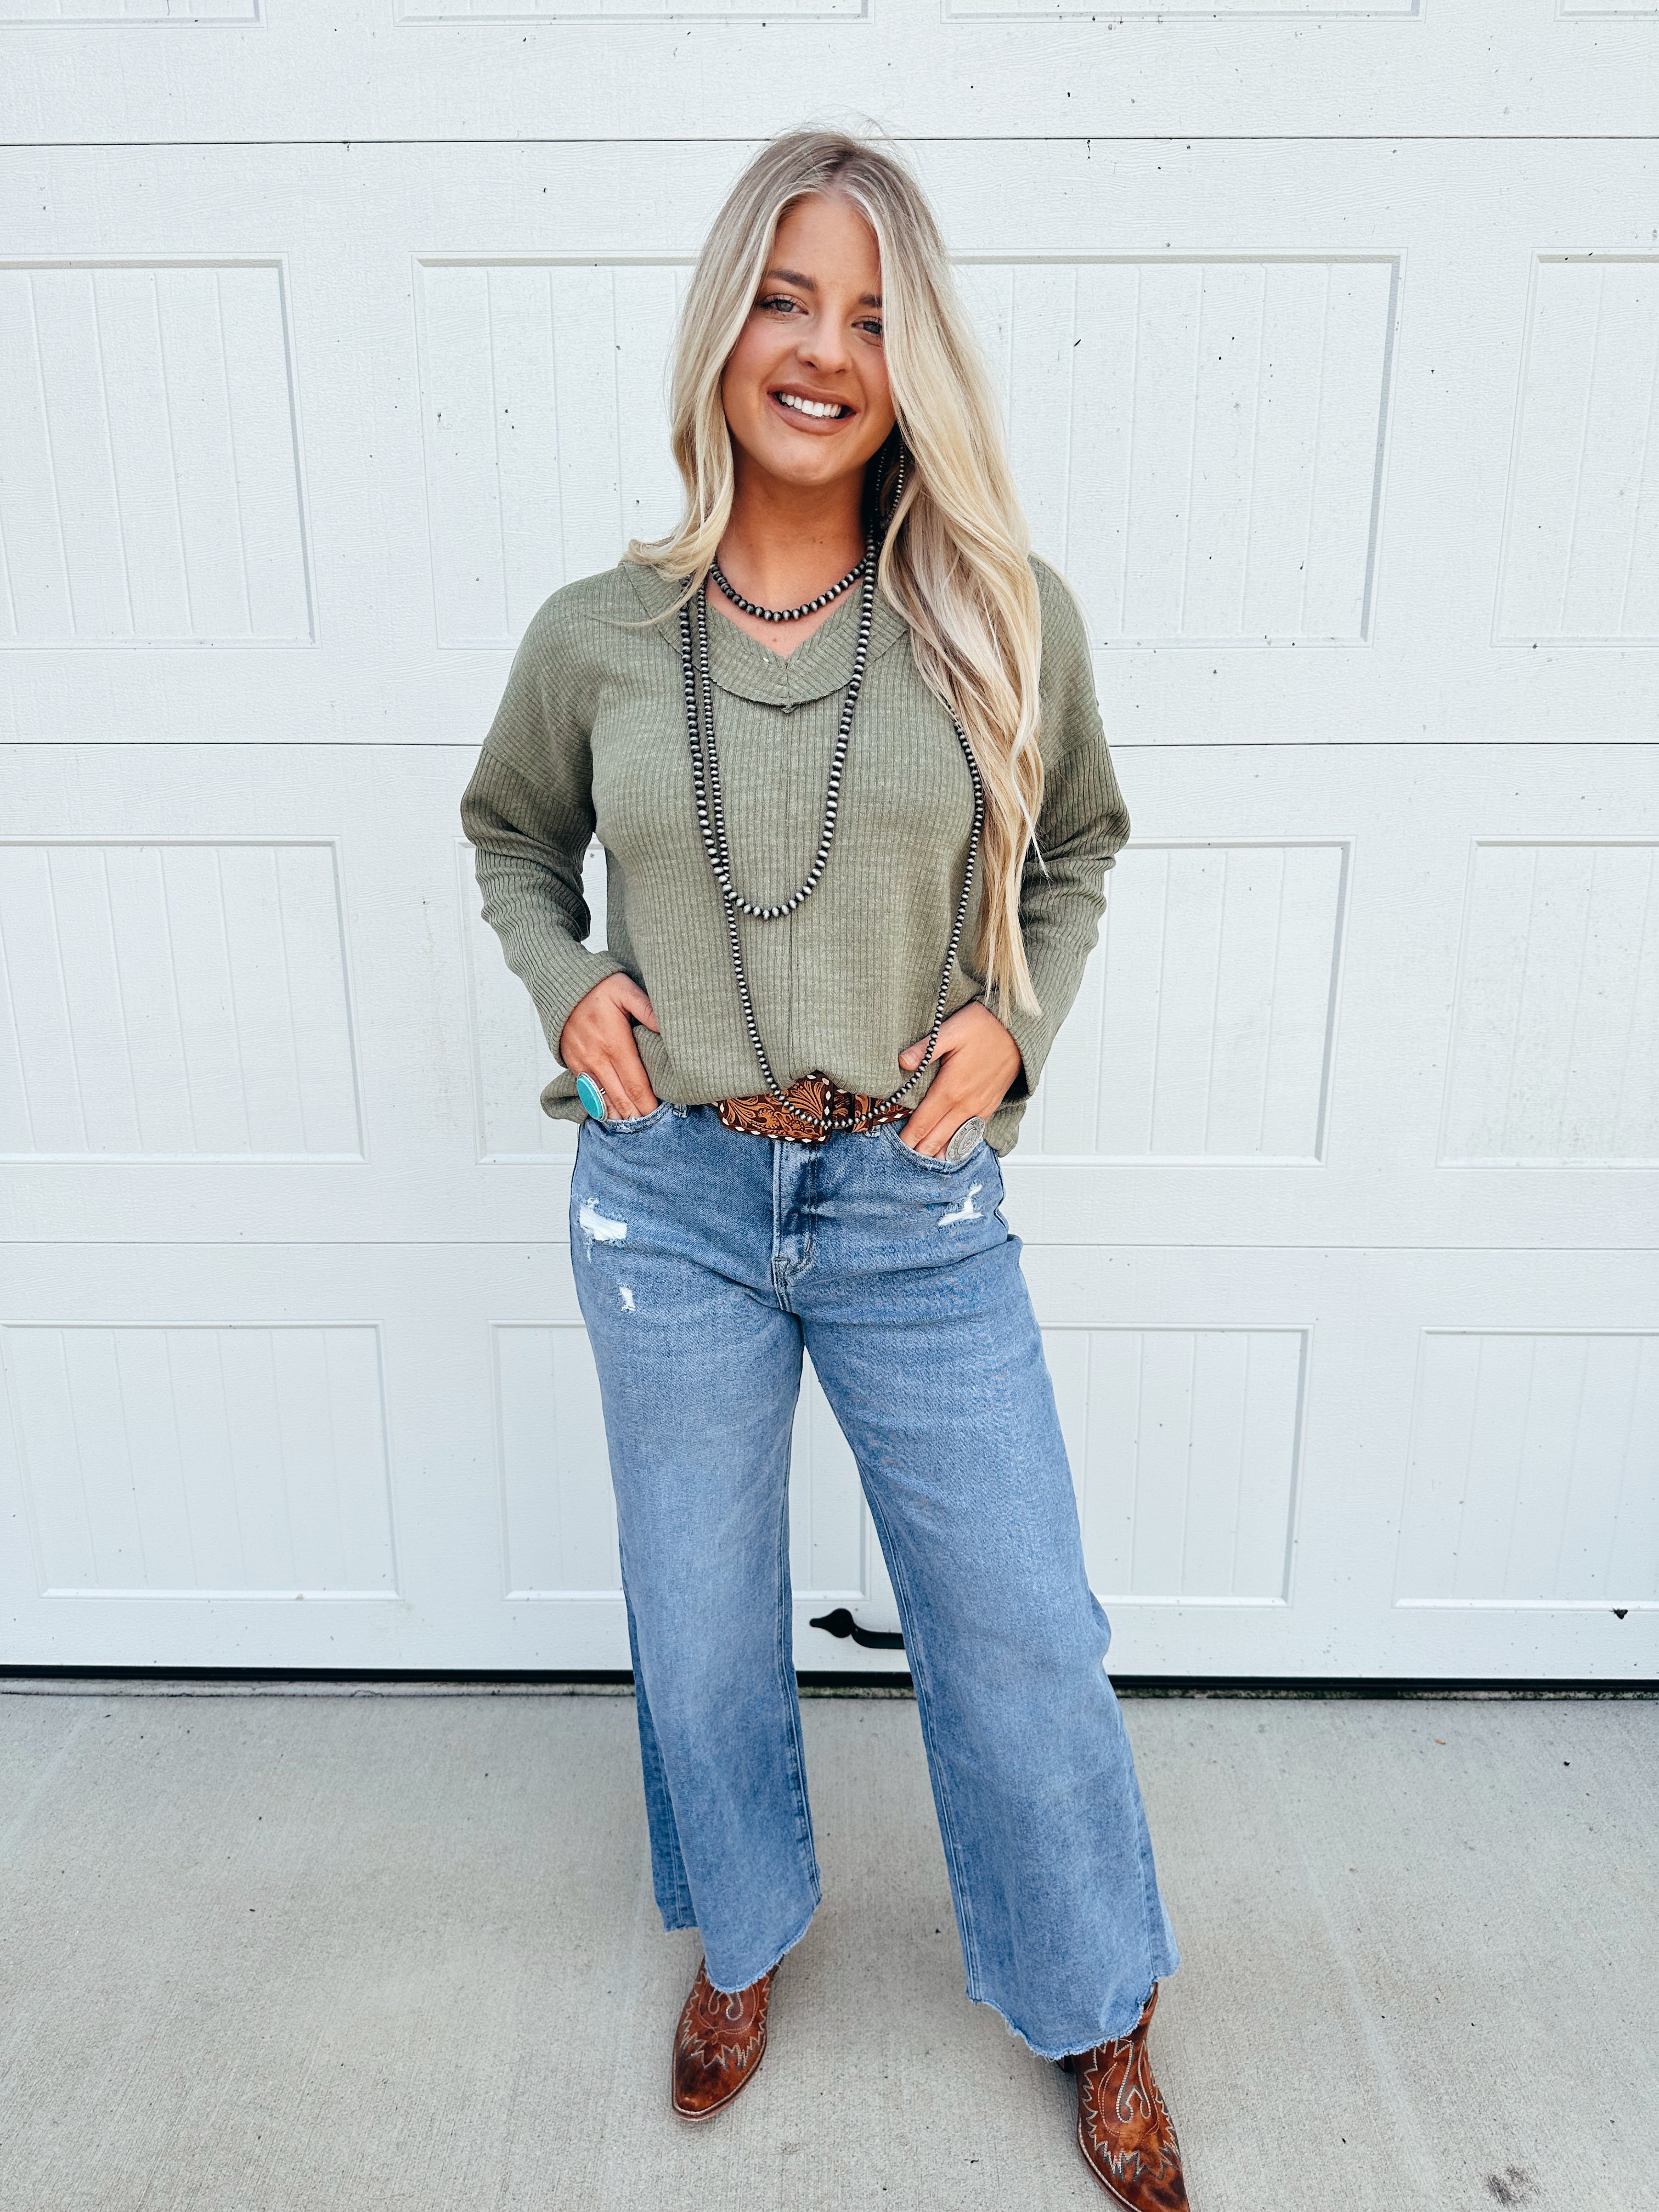 The Atwood Top in Olive